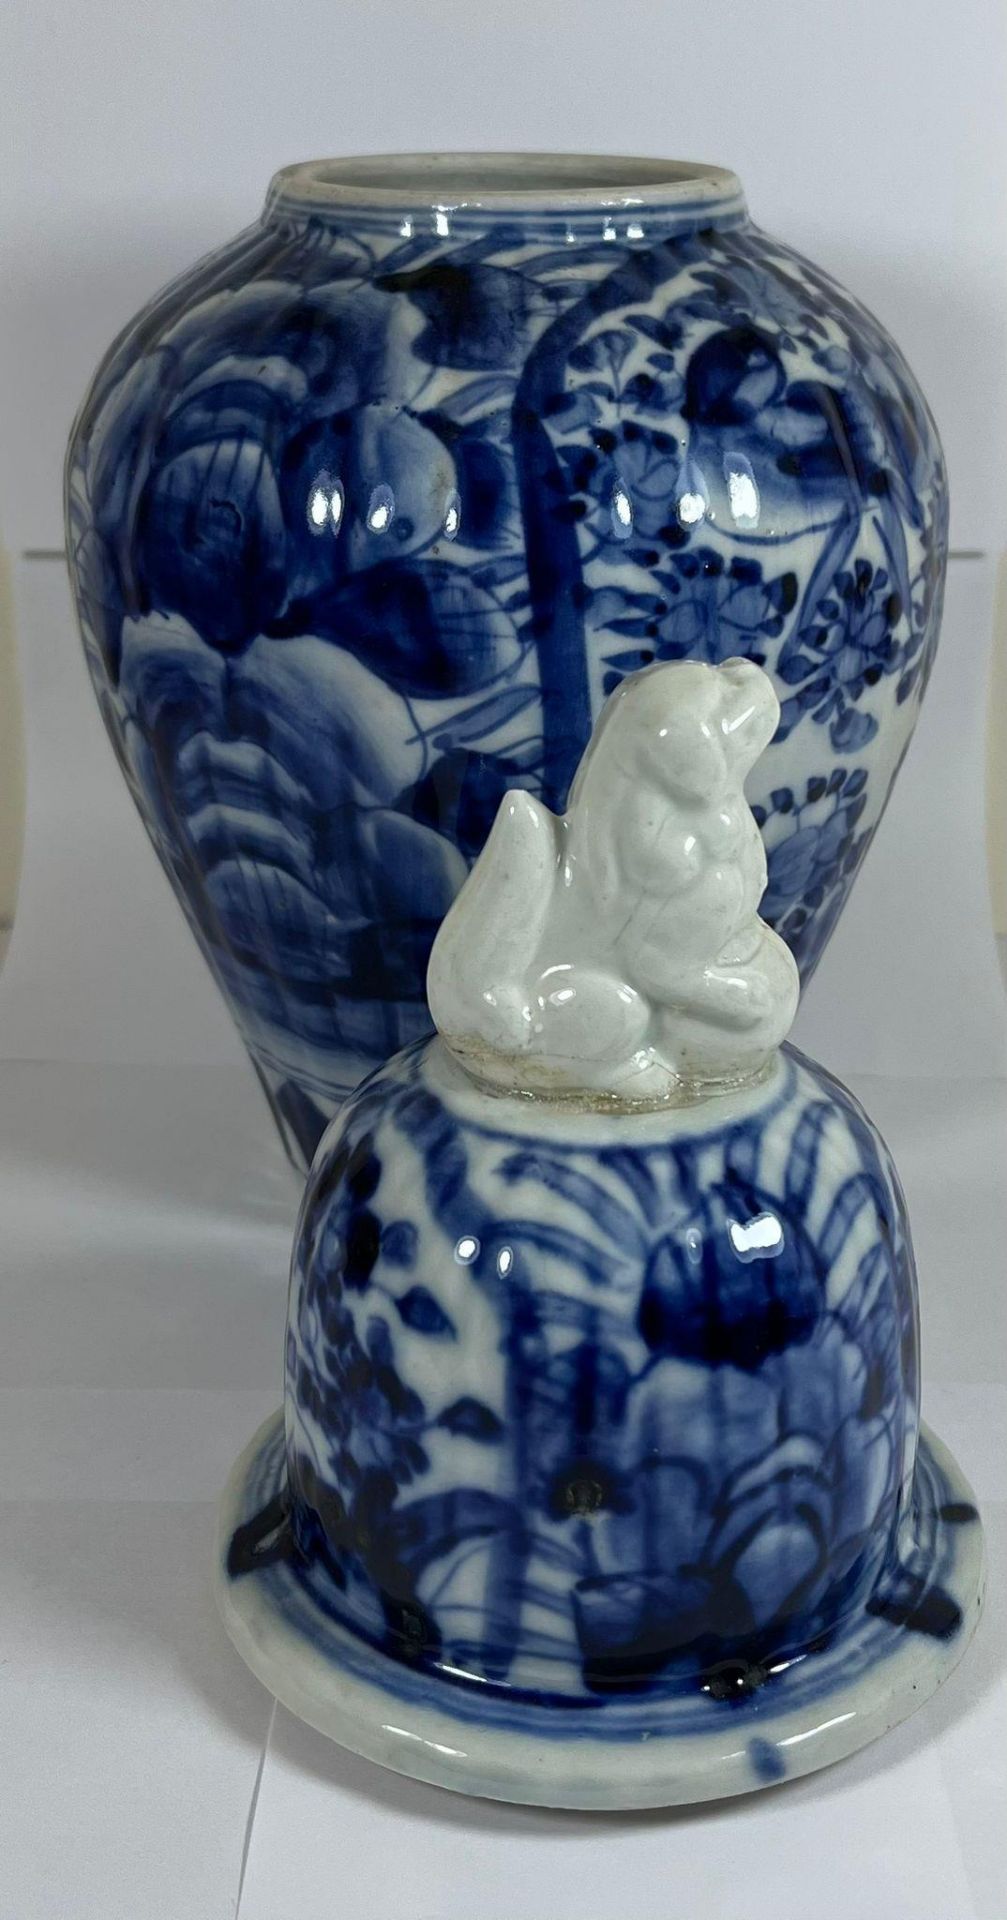 A JAPANESE MEIJI PERIOD (1868-1912) BLUE AND WHITE LIDDED TEMPLE JAR (FINIAL A/F), HEIGHT 30CM - Image 2 of 7